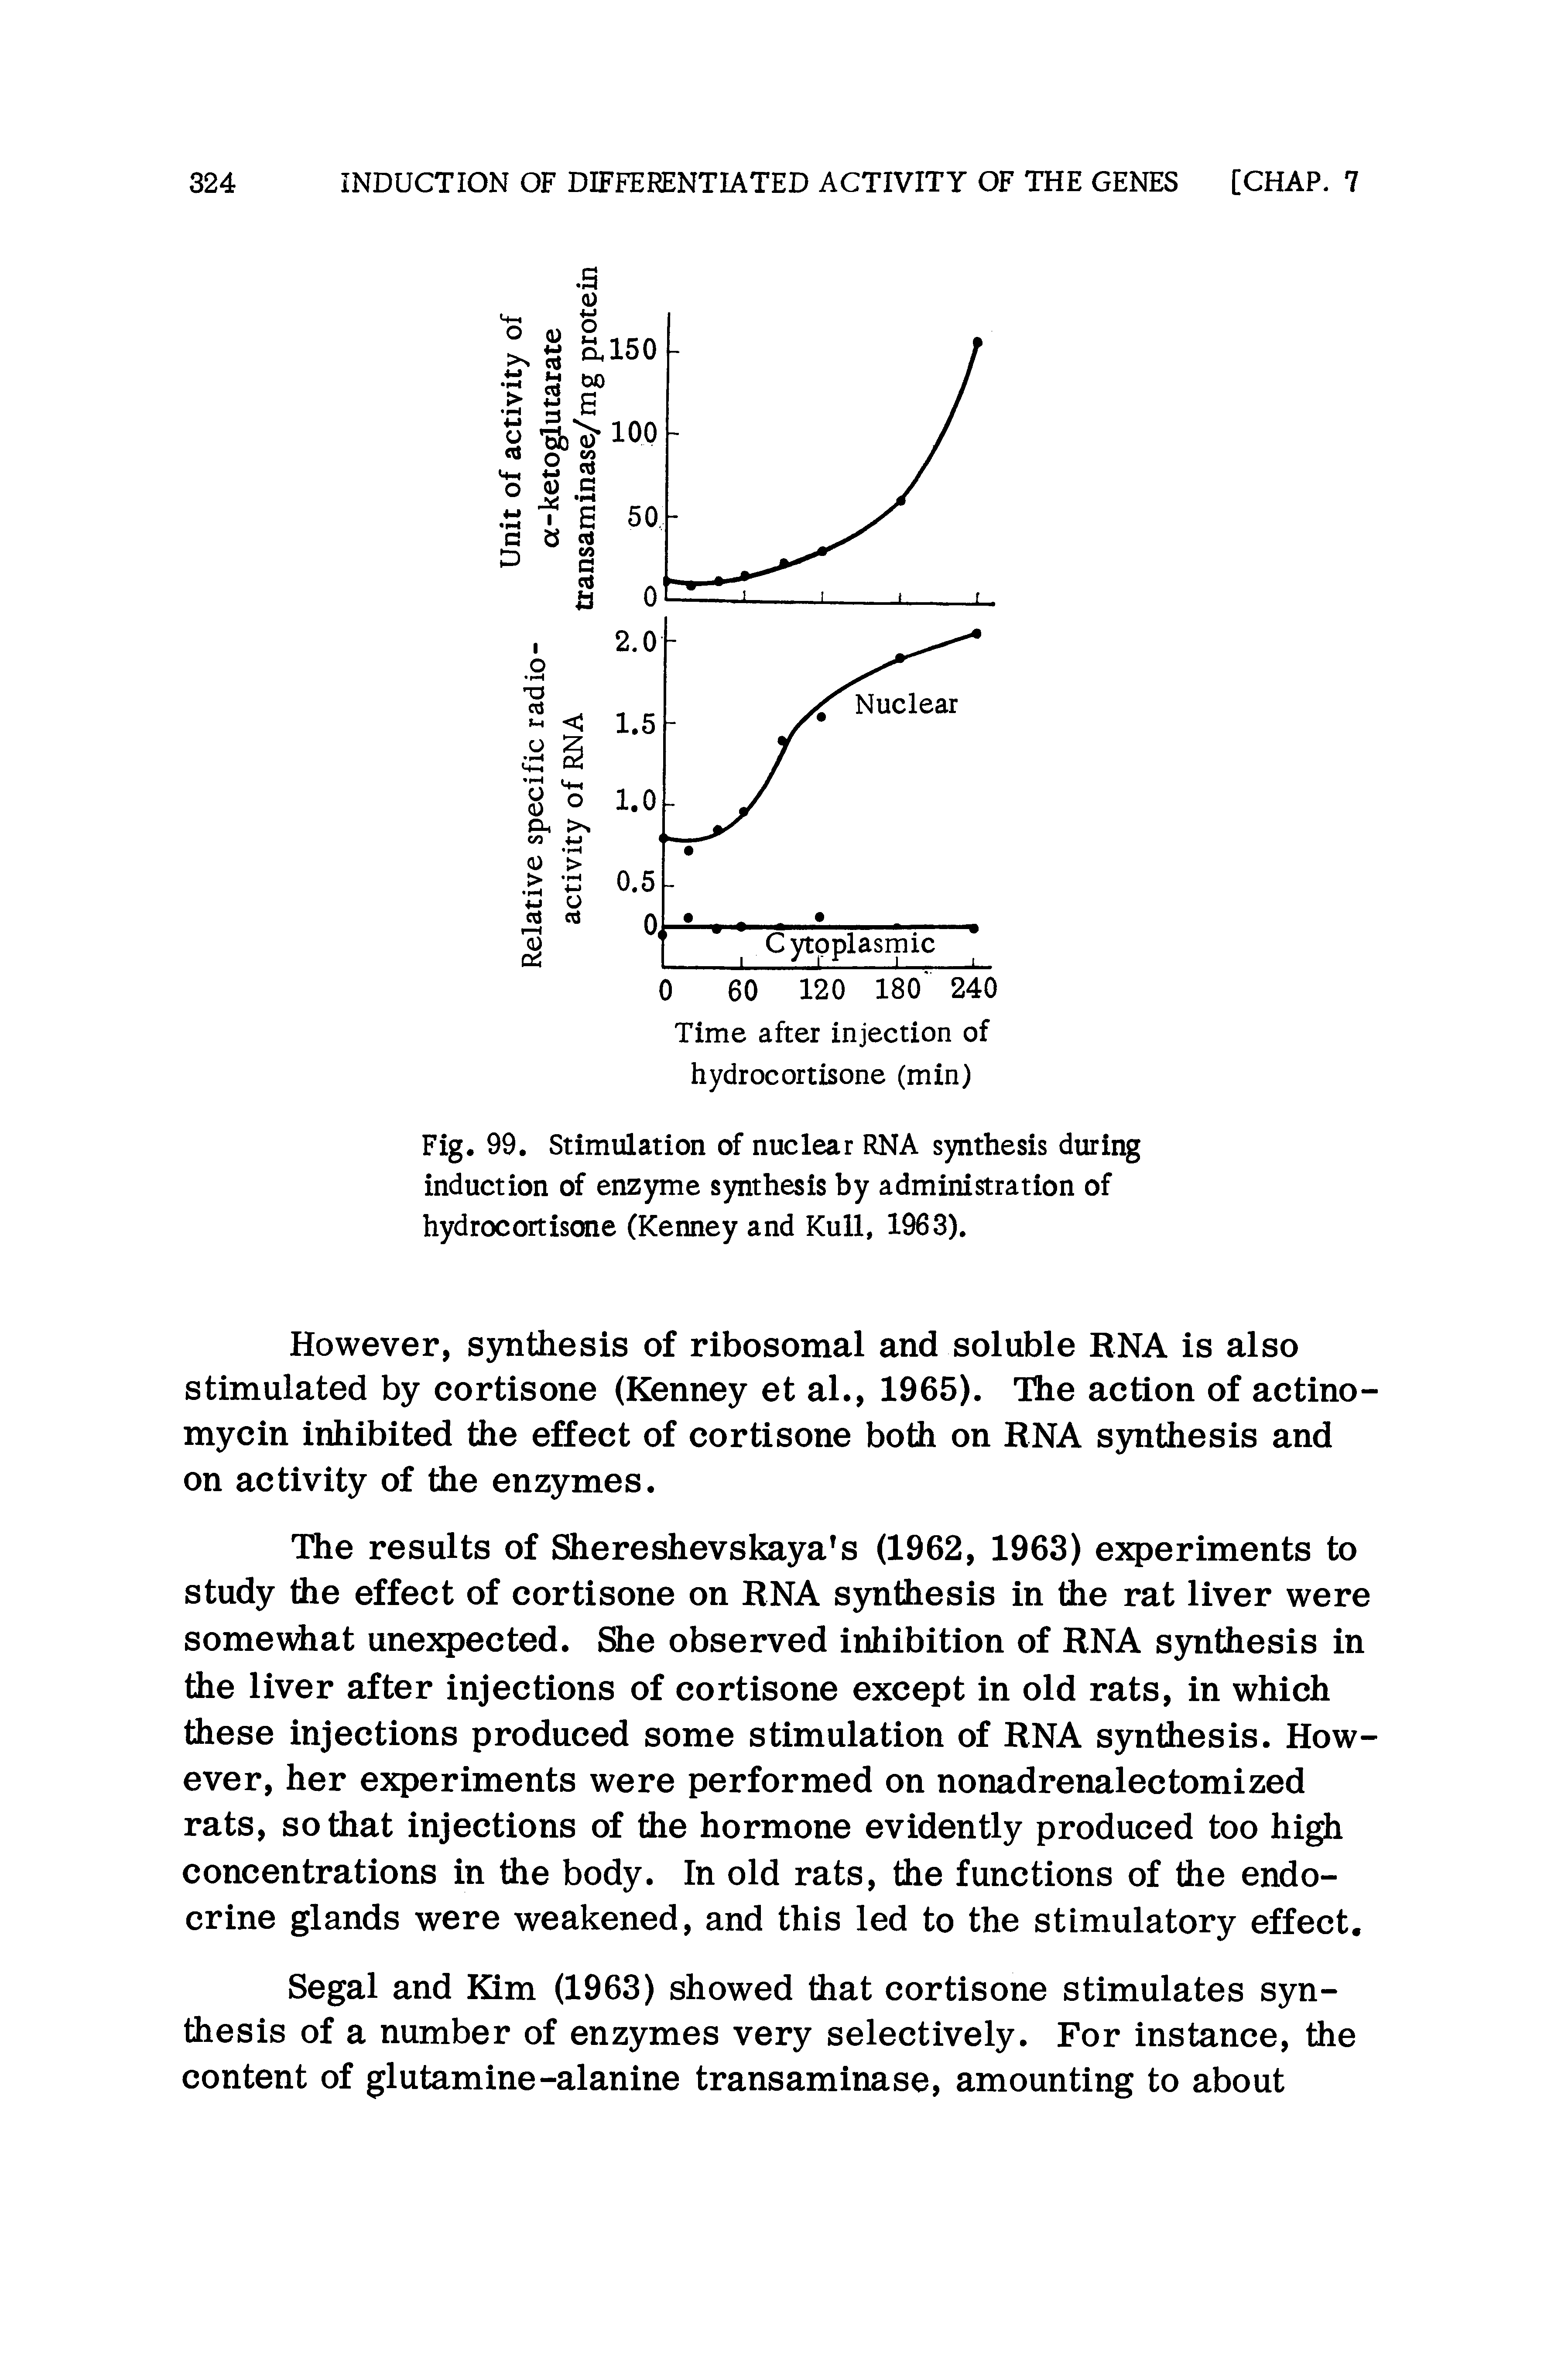 Fig. 99. Stimulation of nuclear RNA synthesis during induction of enzyme synthesis by administration of hydrocortisone (Kenney and Kull, 1963).